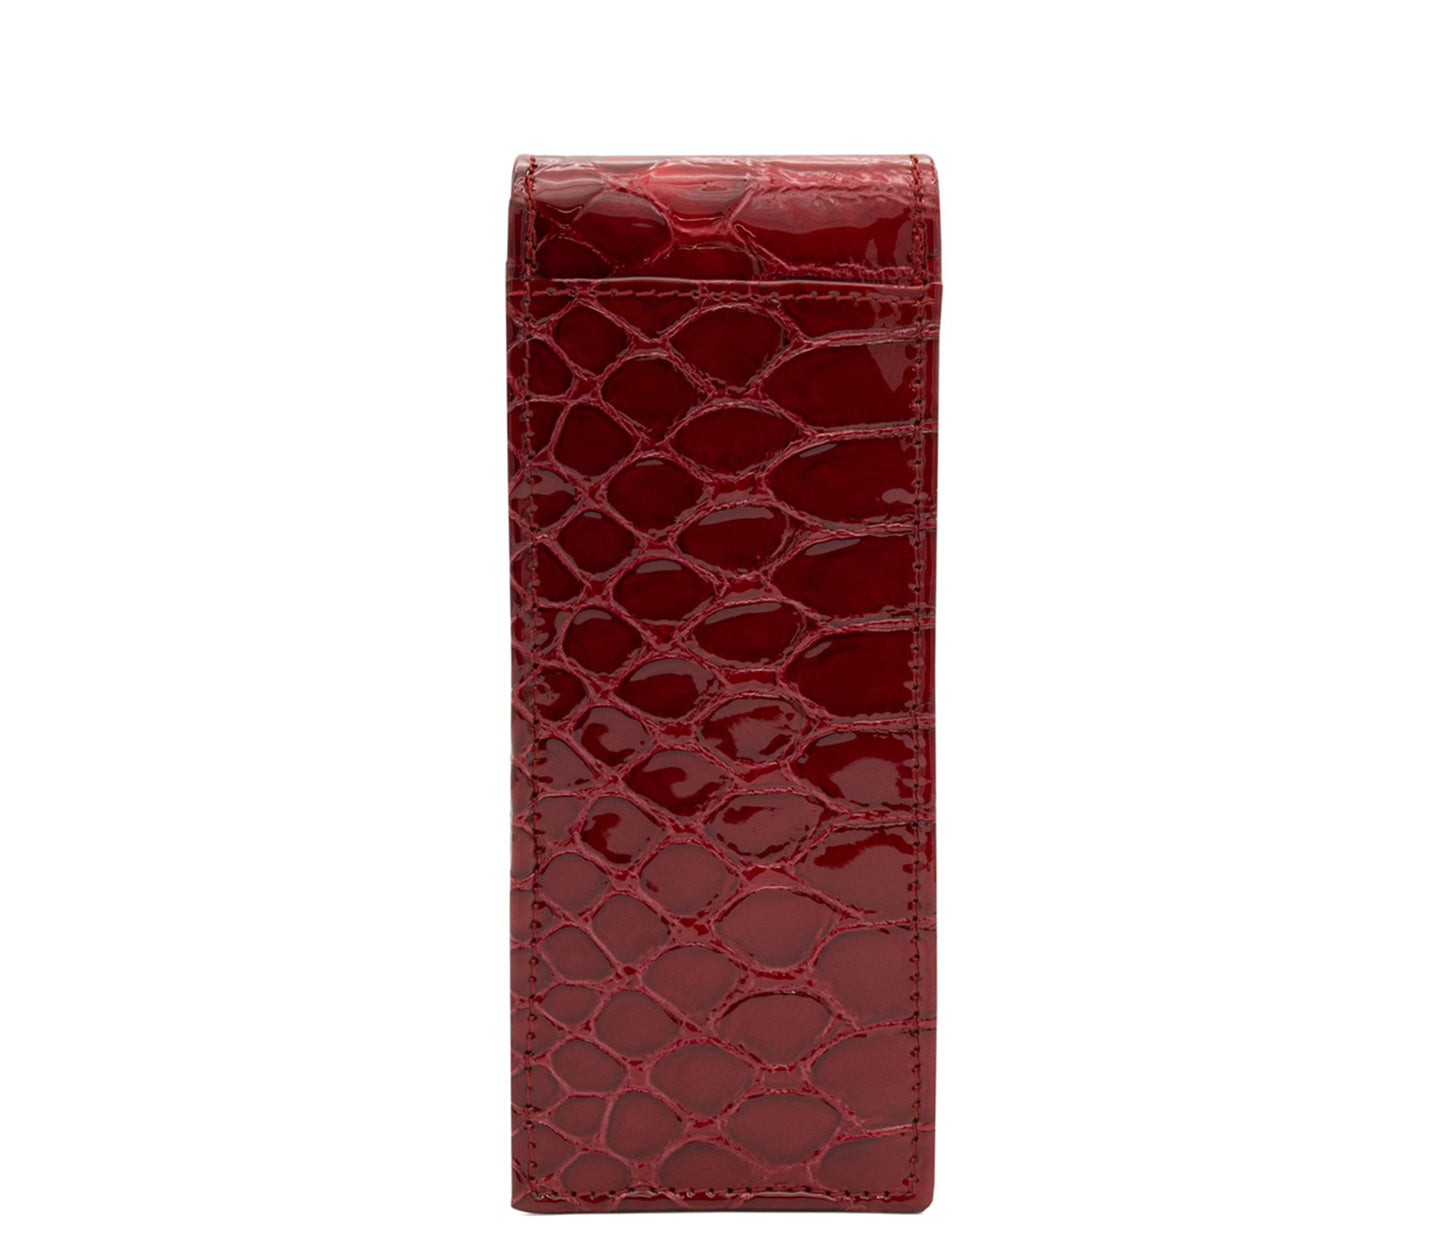 Cavalinho Galope Patent Leather Cosmetic Pencil Holders - Red - 28170270.04_2